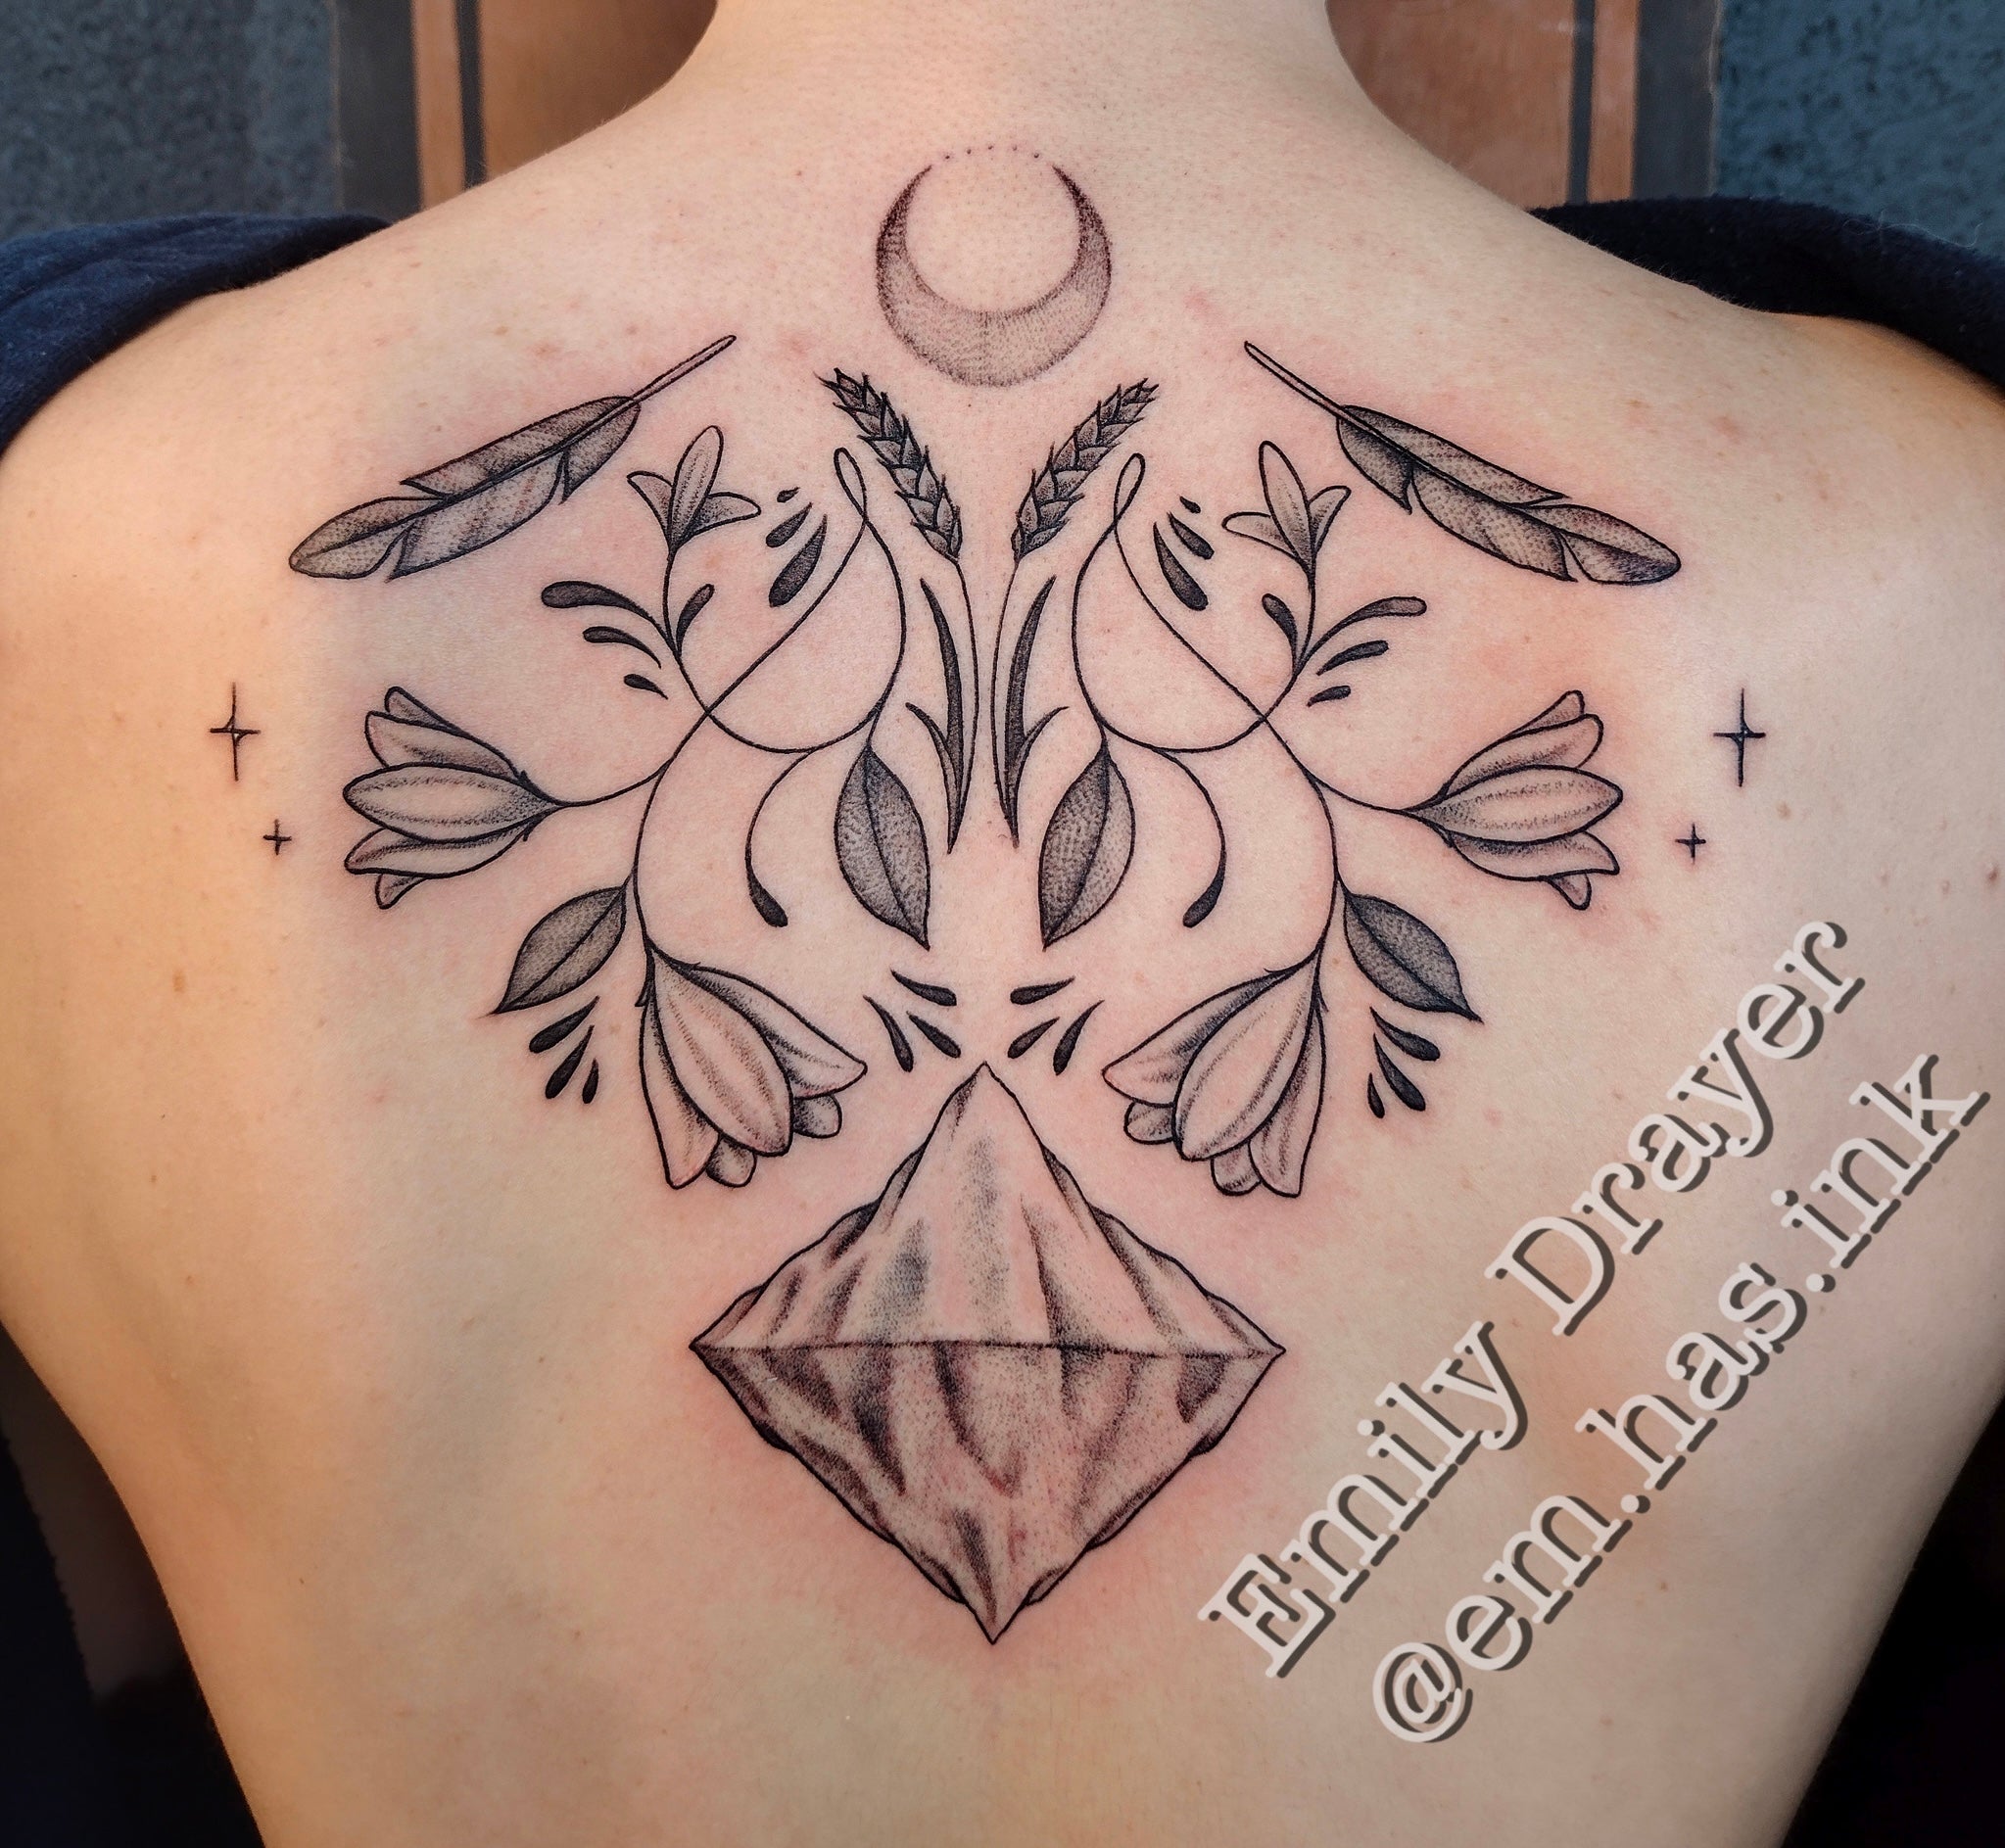 Chest/sternum tattoo made for Reece! Really liking how this turned out! Who  else want something similar?? 📲📲 click the link in my b... | Instagram